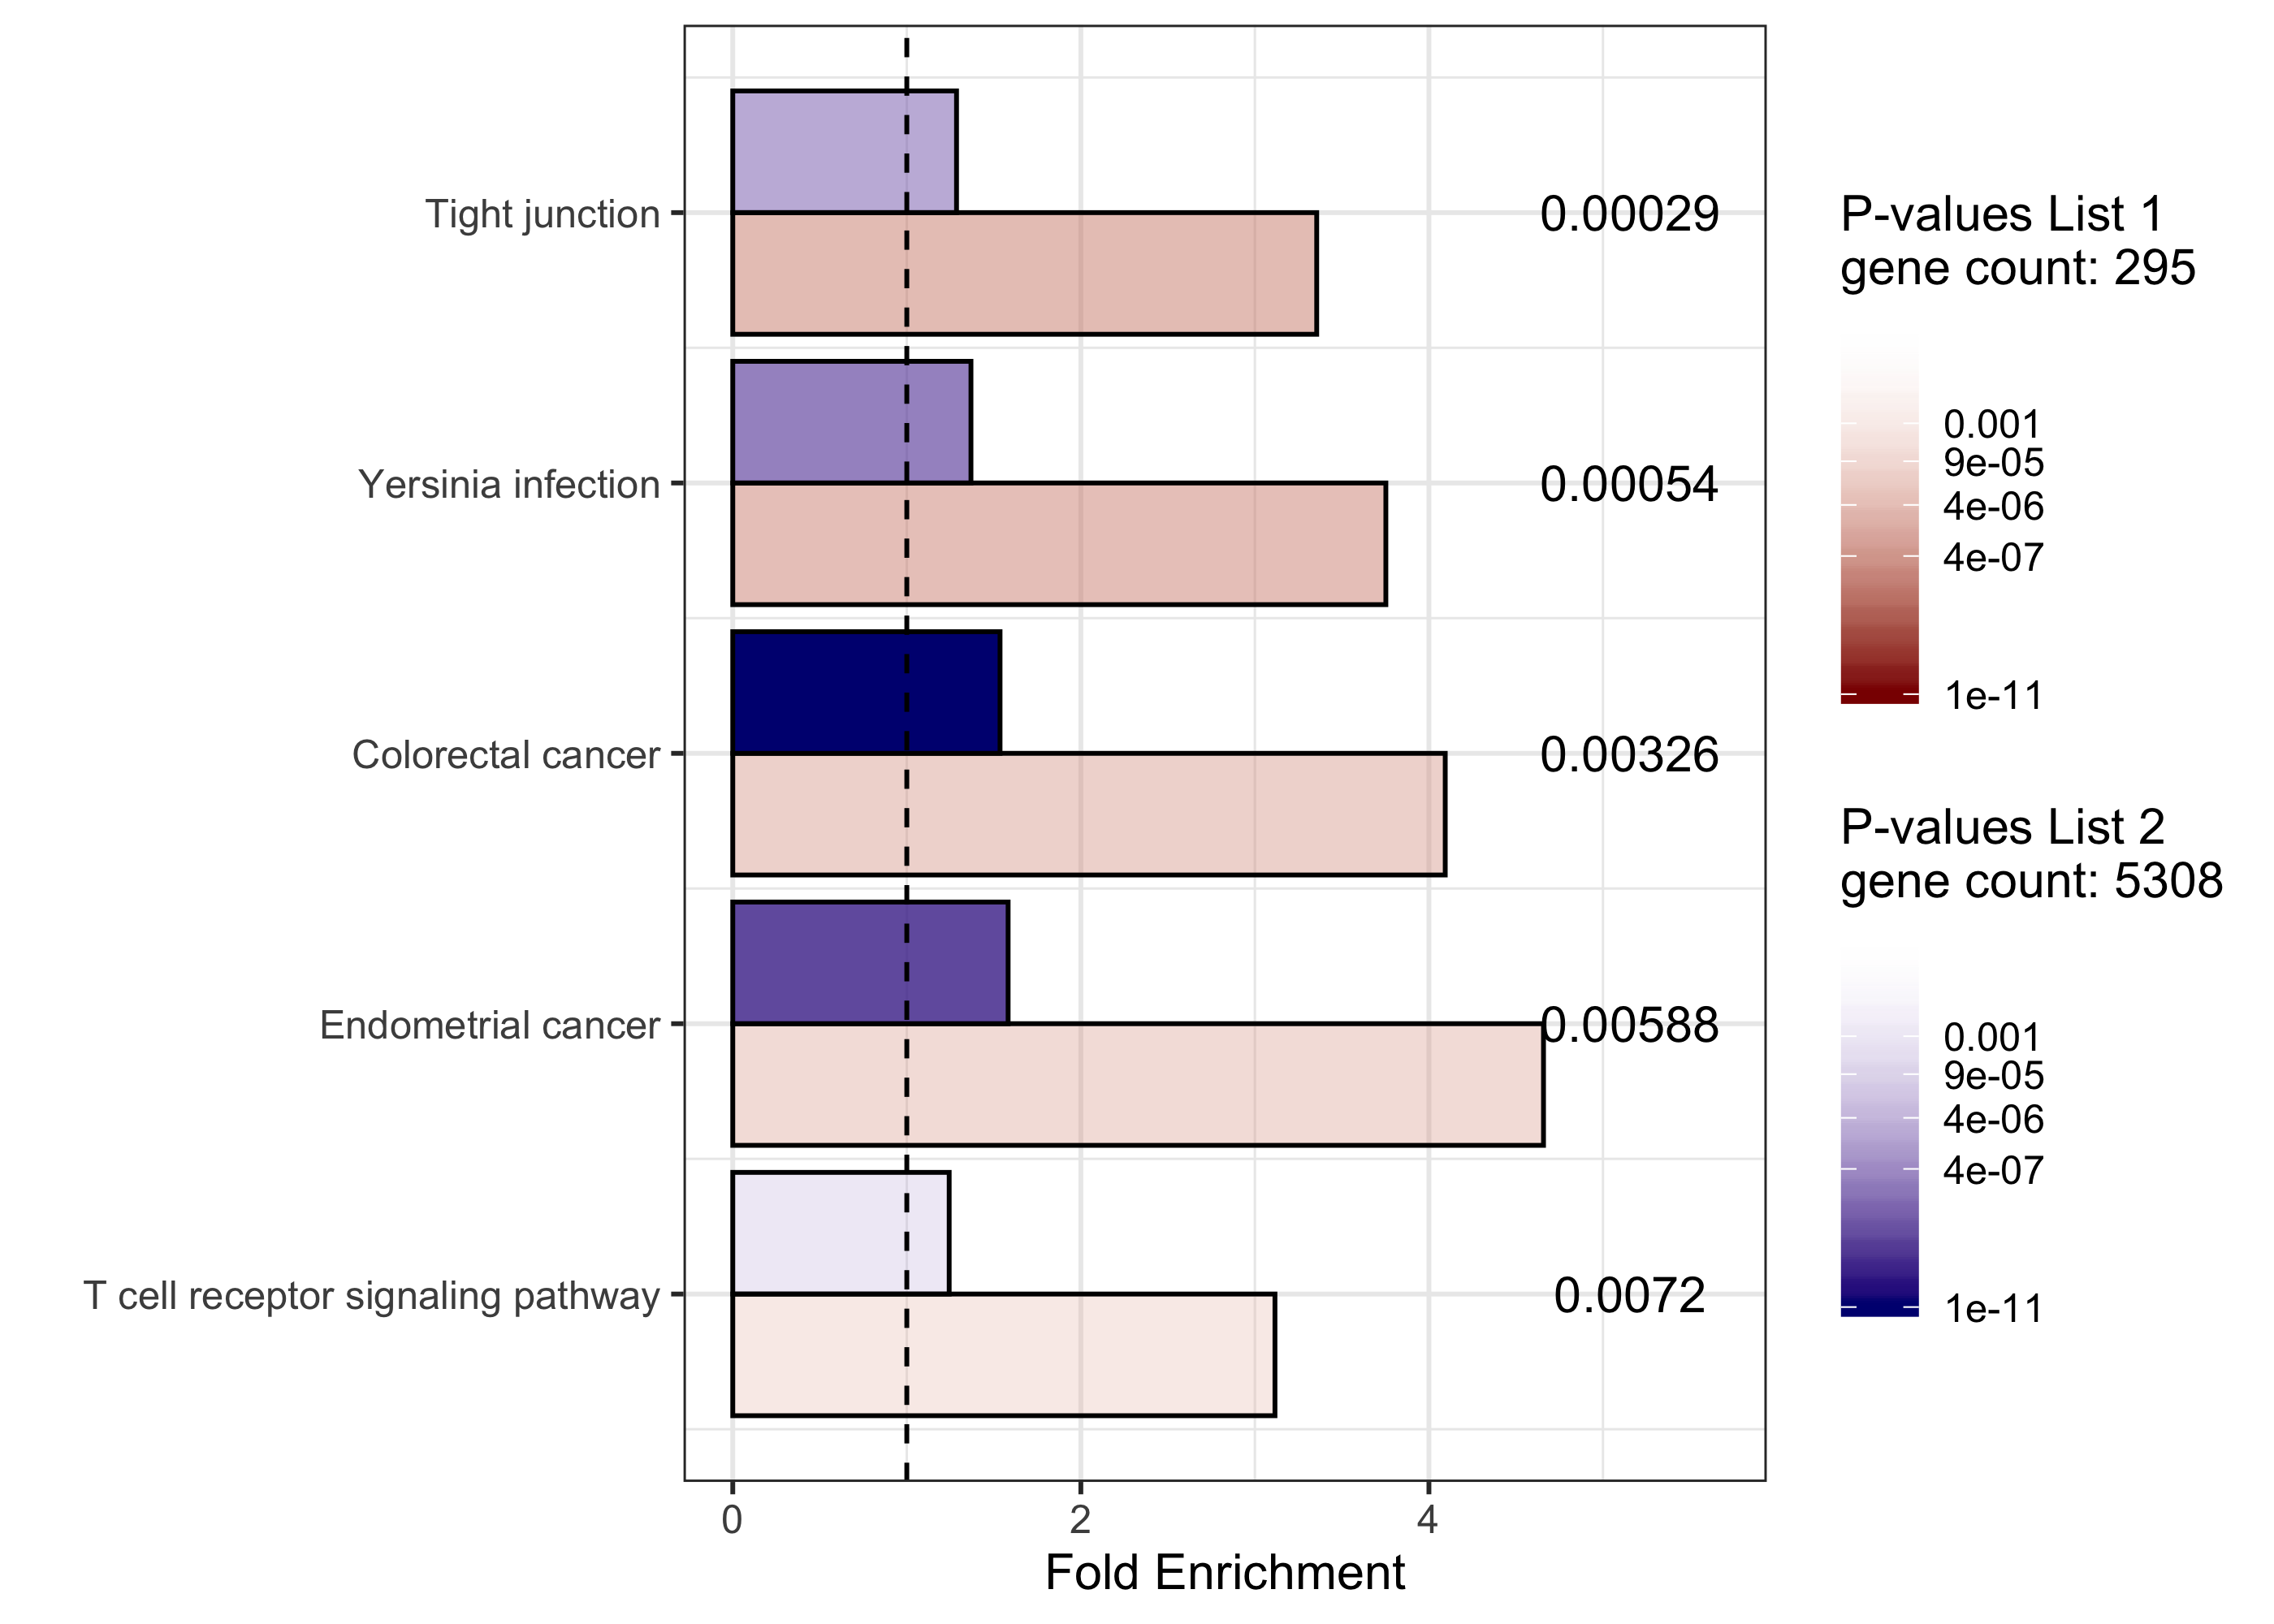 Figure 2. Example of a differential enrichment graphic. KEGG pathways are plotted on the y-axis and fold
enrichment is plotted on the x-axis. Each KEGG pathway has a bar depicting
its fold enrichment in list 1 (red) and its fold enrichment in list 2 (blue).
The transparency of the bars correspond to the unadjusted p-value for the
pathway's enrichment in the given list. The p-value presented as text to the
right of each pair of bars is the adjusted p-value (user defined: default is FDR) associated with the
differential enrichment of the pathway between the two lists, and the pathways
are ordered from top to bottom by this p-value (i.e. smallest p-value on top
of plot, and largest p-value on bottom of plot). The dotted line represents a fold enrichment of 1. Finally, the number of genes used
for analysis from each gene list (recall that this number may not be the same as the number of
genes in the user's original list) are reported below their respective p-values
in the legend.